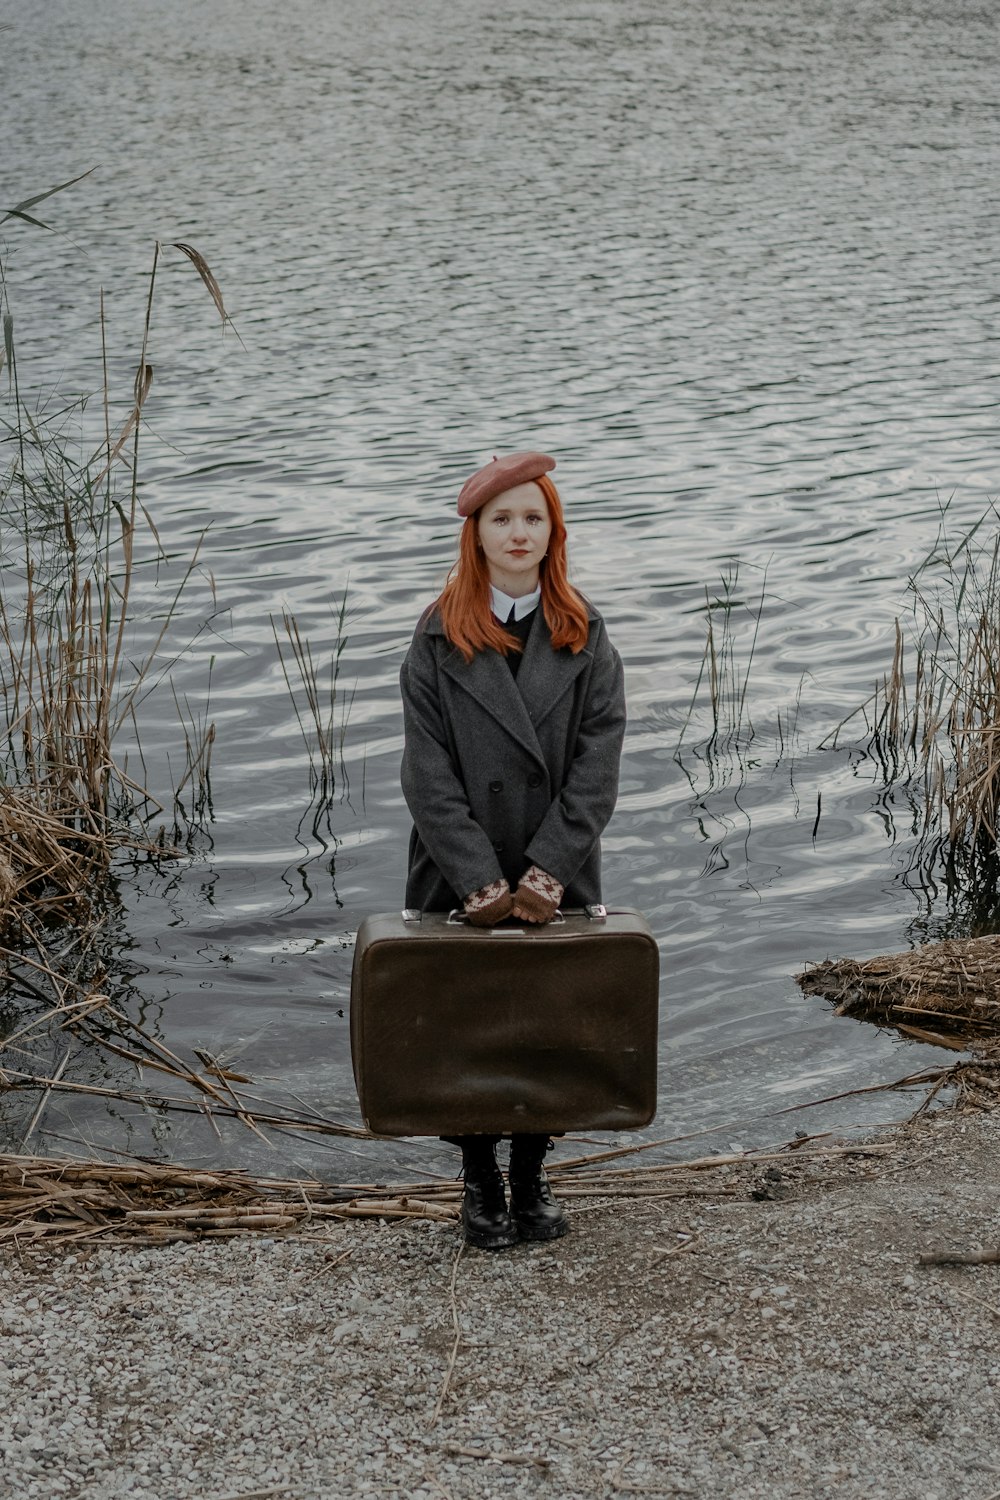 a woman sitting on a suitcase in the water